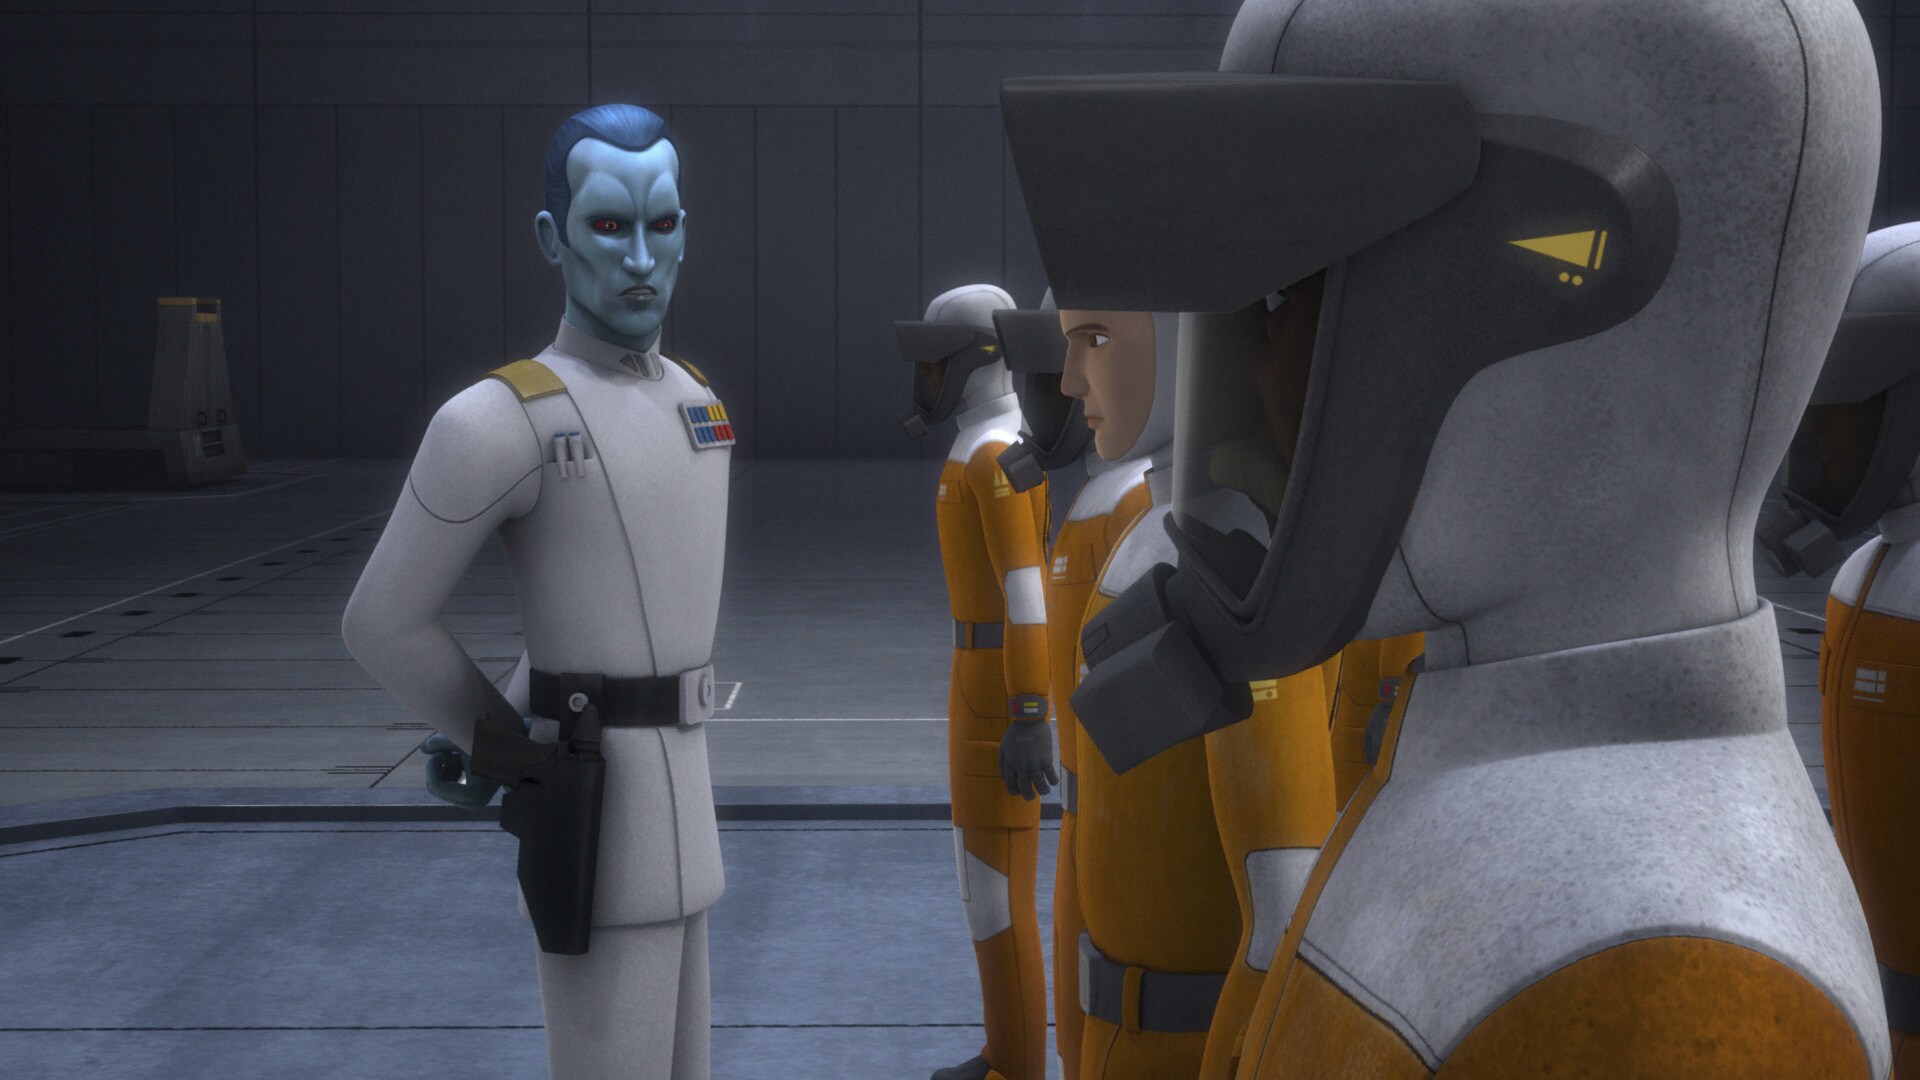 The assignment gave Thrawn the chance to demonstrate his ruthless pursuit of perfection, tasking workers with personally testing out the vehicles they produced and killing one employee before the assembled crew.